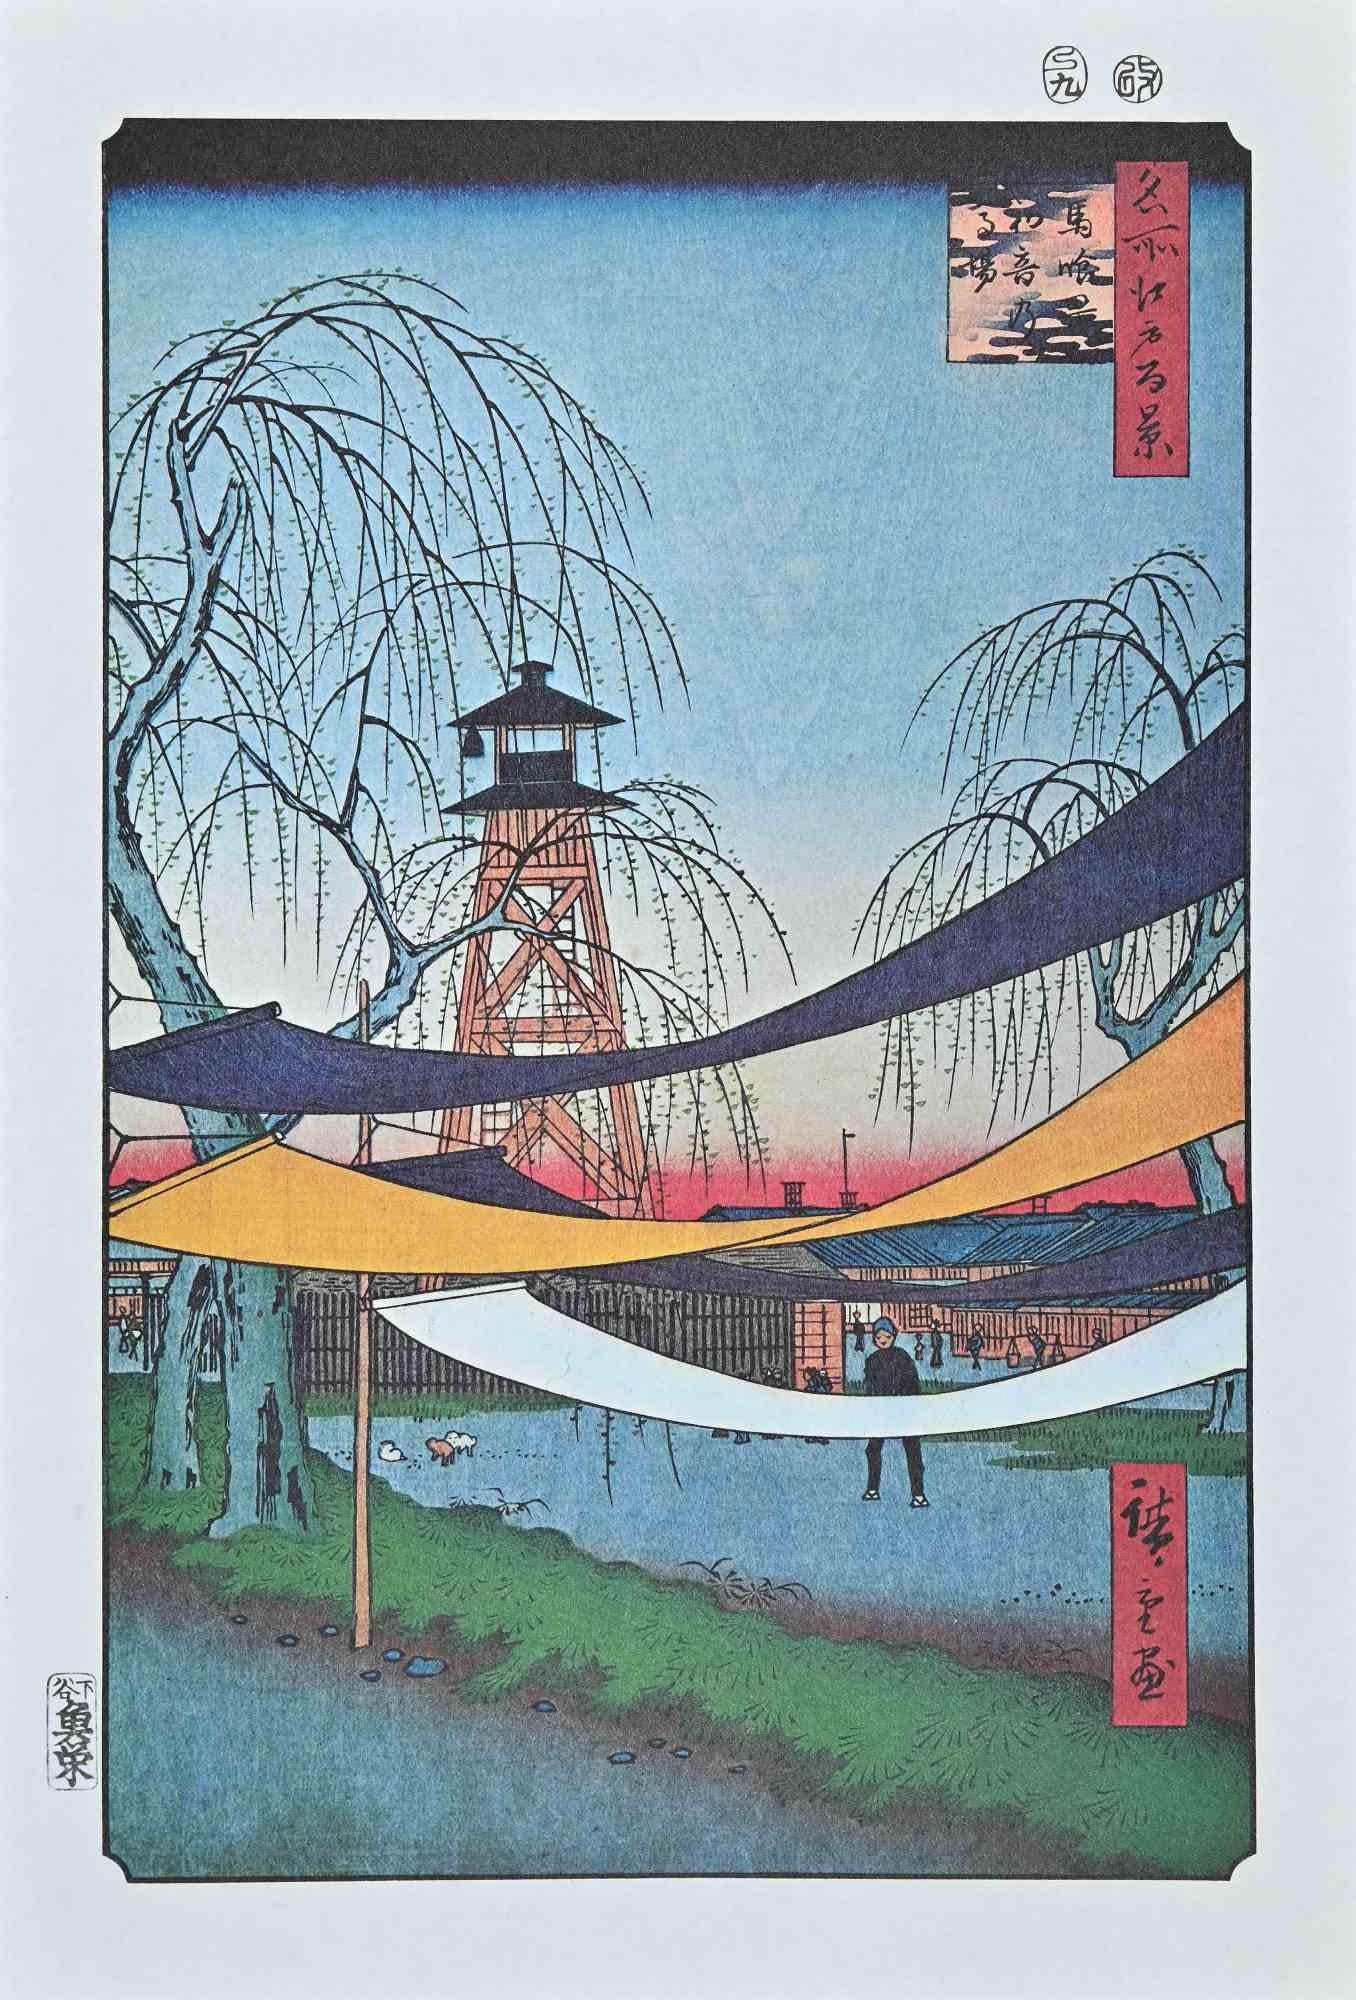 Hatsune Riding Grounds, Bakuro-cho is a modern artwork realized in the mid-20th century after Utagawa Hiroshige.

Mixed colored lithograph after a woodcut realized by Utagawa Hiroshige in 1857 and from the series "Meisho Edo Hyakkei" ("One Hundred